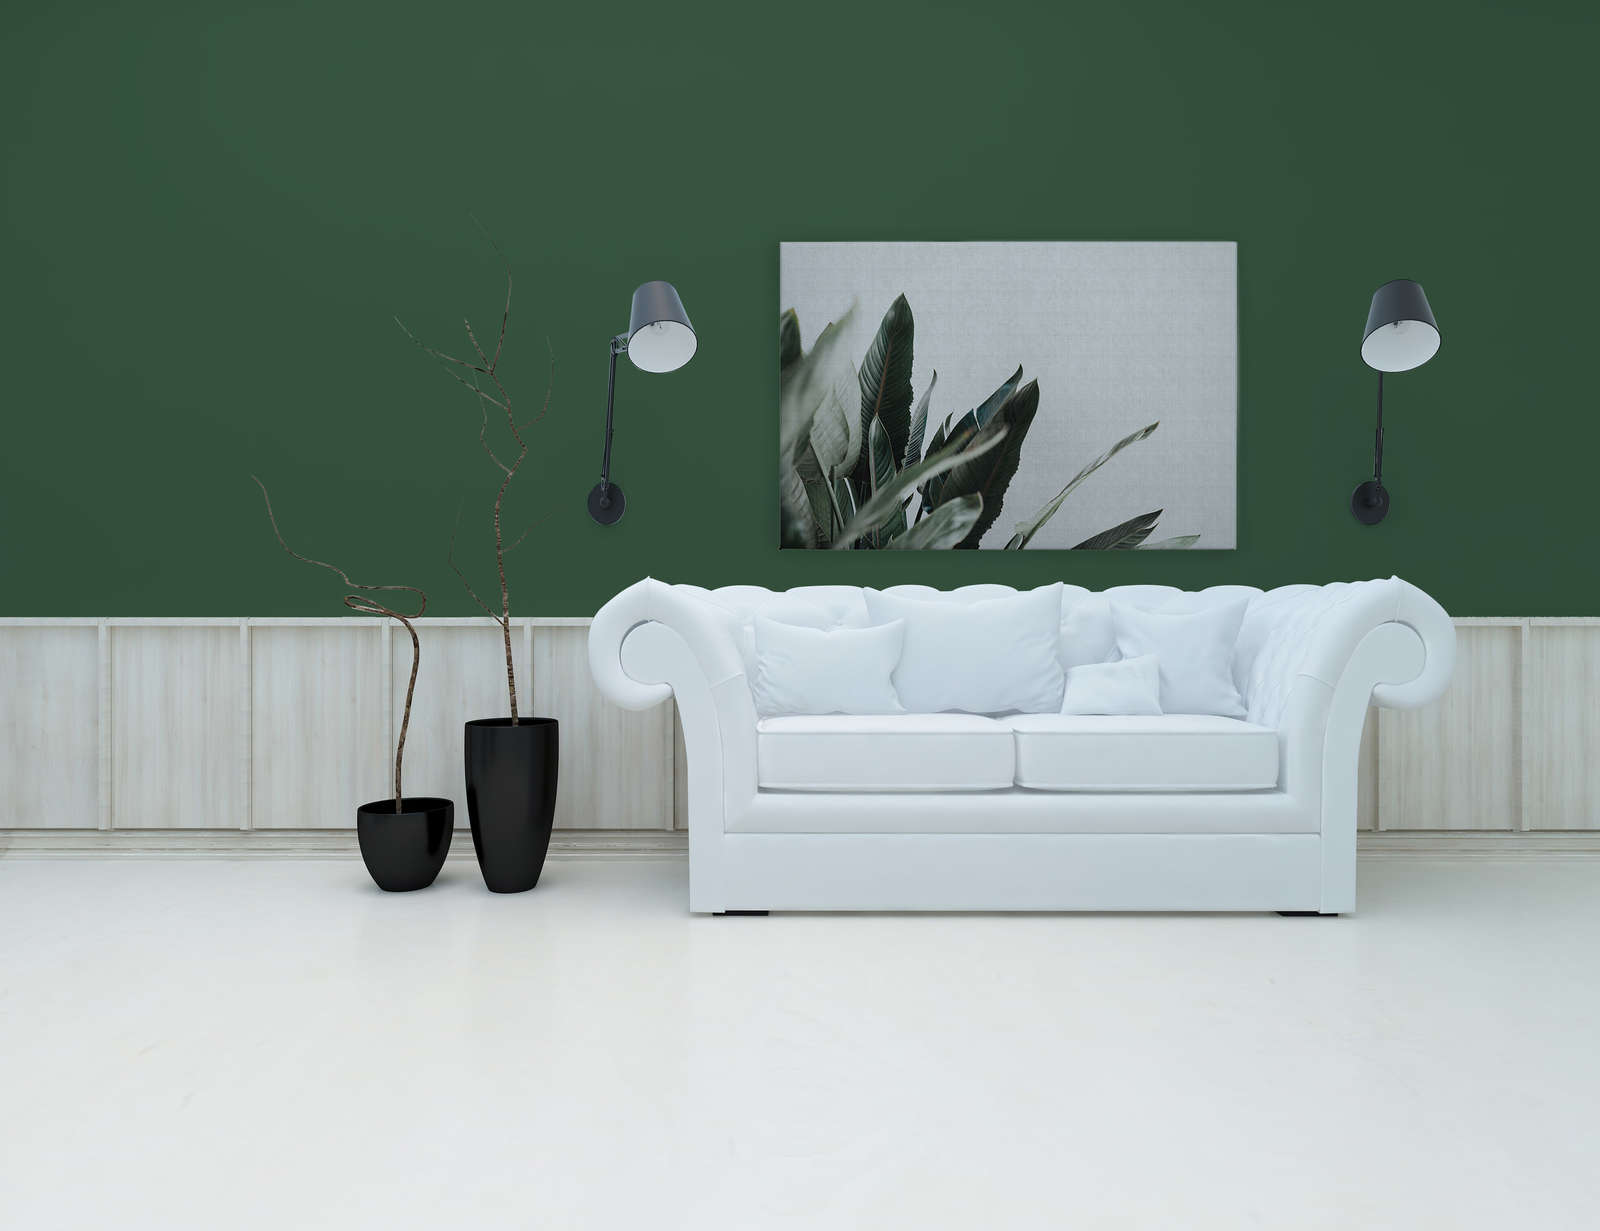             Urban jungle 1 - Canvas painting with palm leaves in natural linen look - 1.20 m x 0.80 m
        